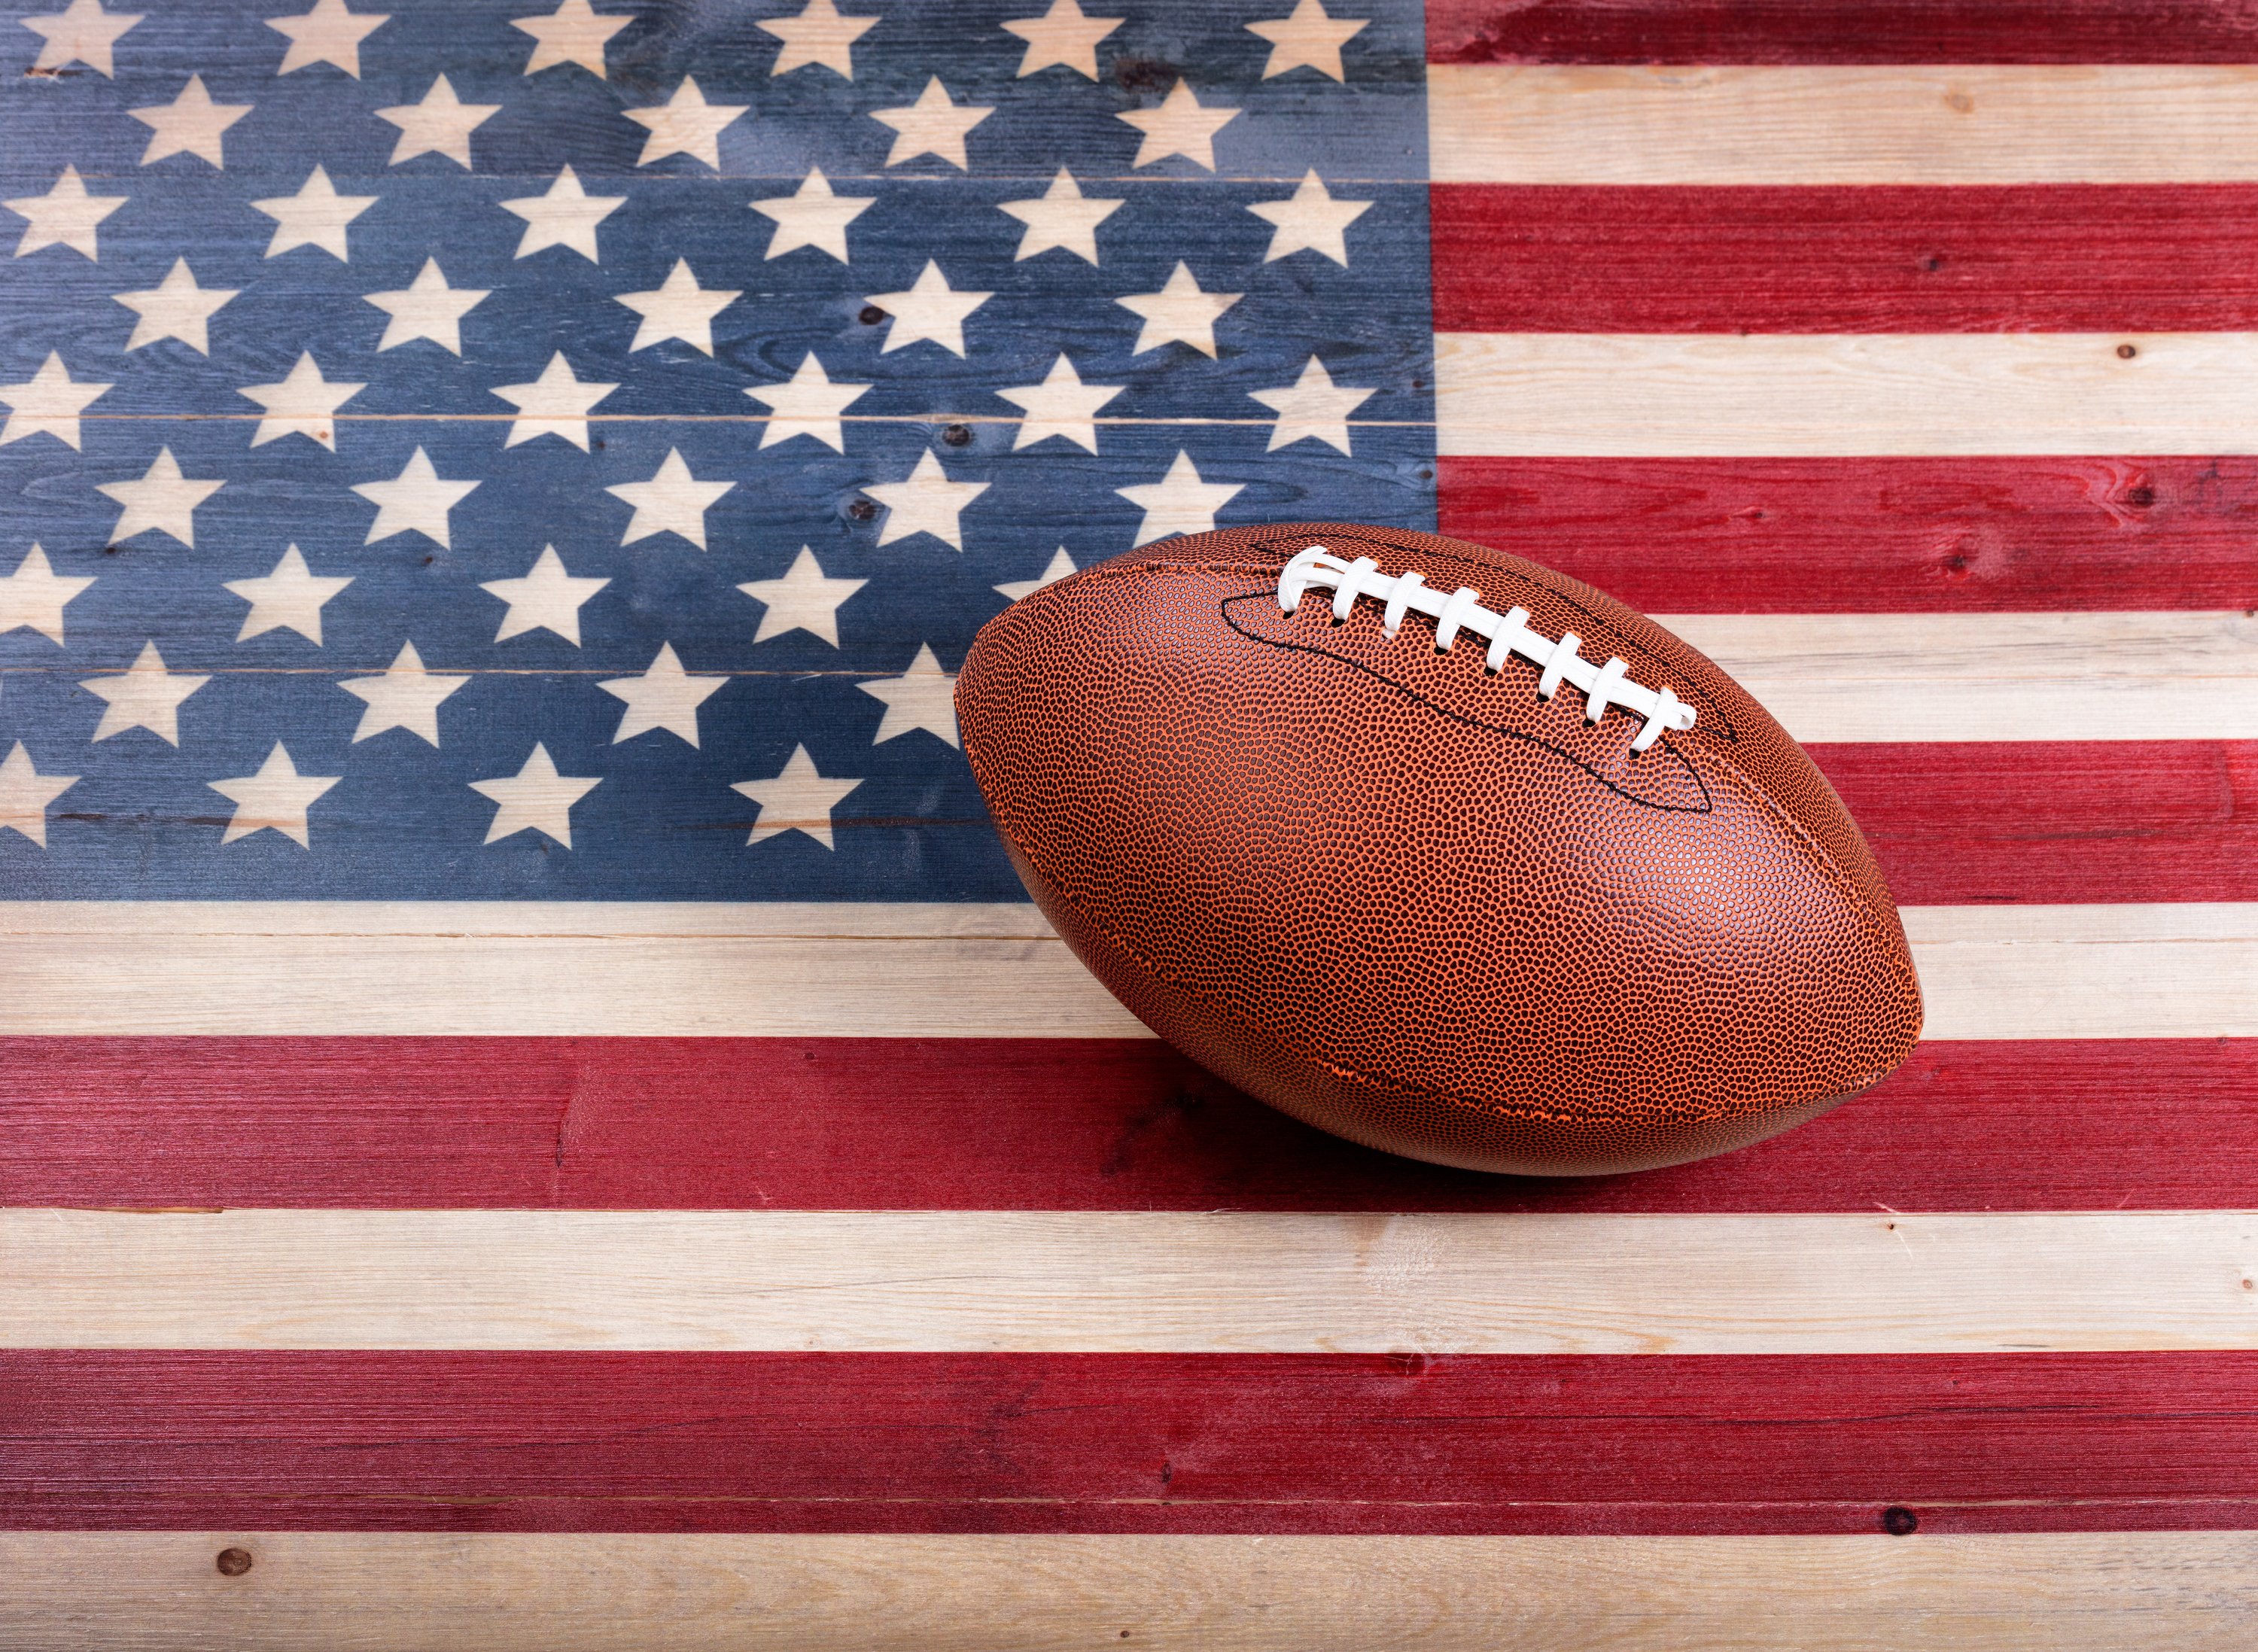 Top view of American football on rustic wooden boards with painted USA Flag.